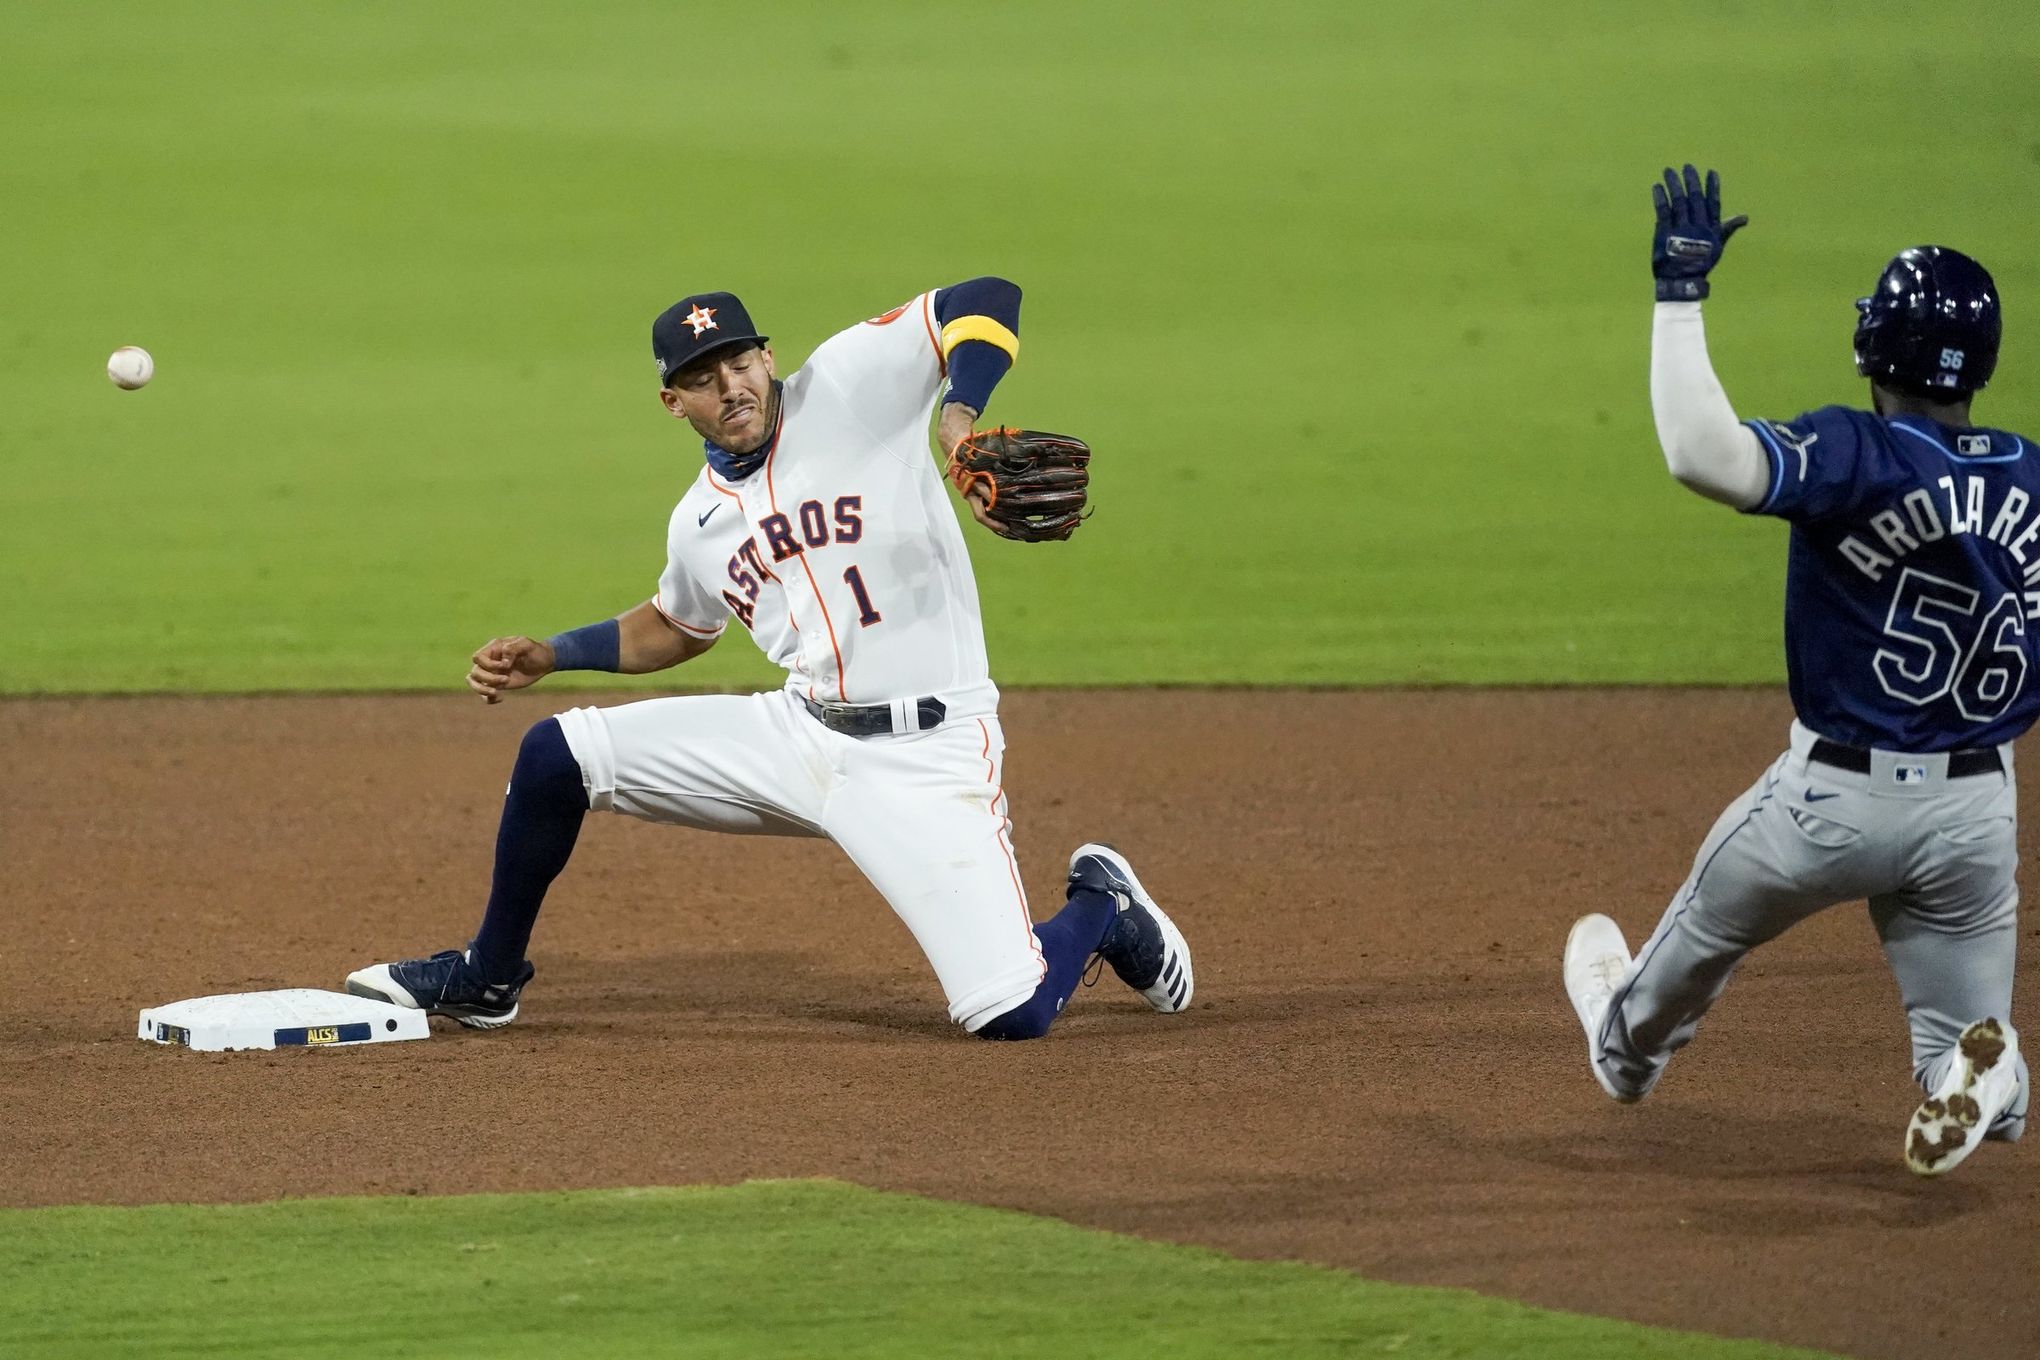 Astros' Jose Altuve comes up big at plate after fielding woes